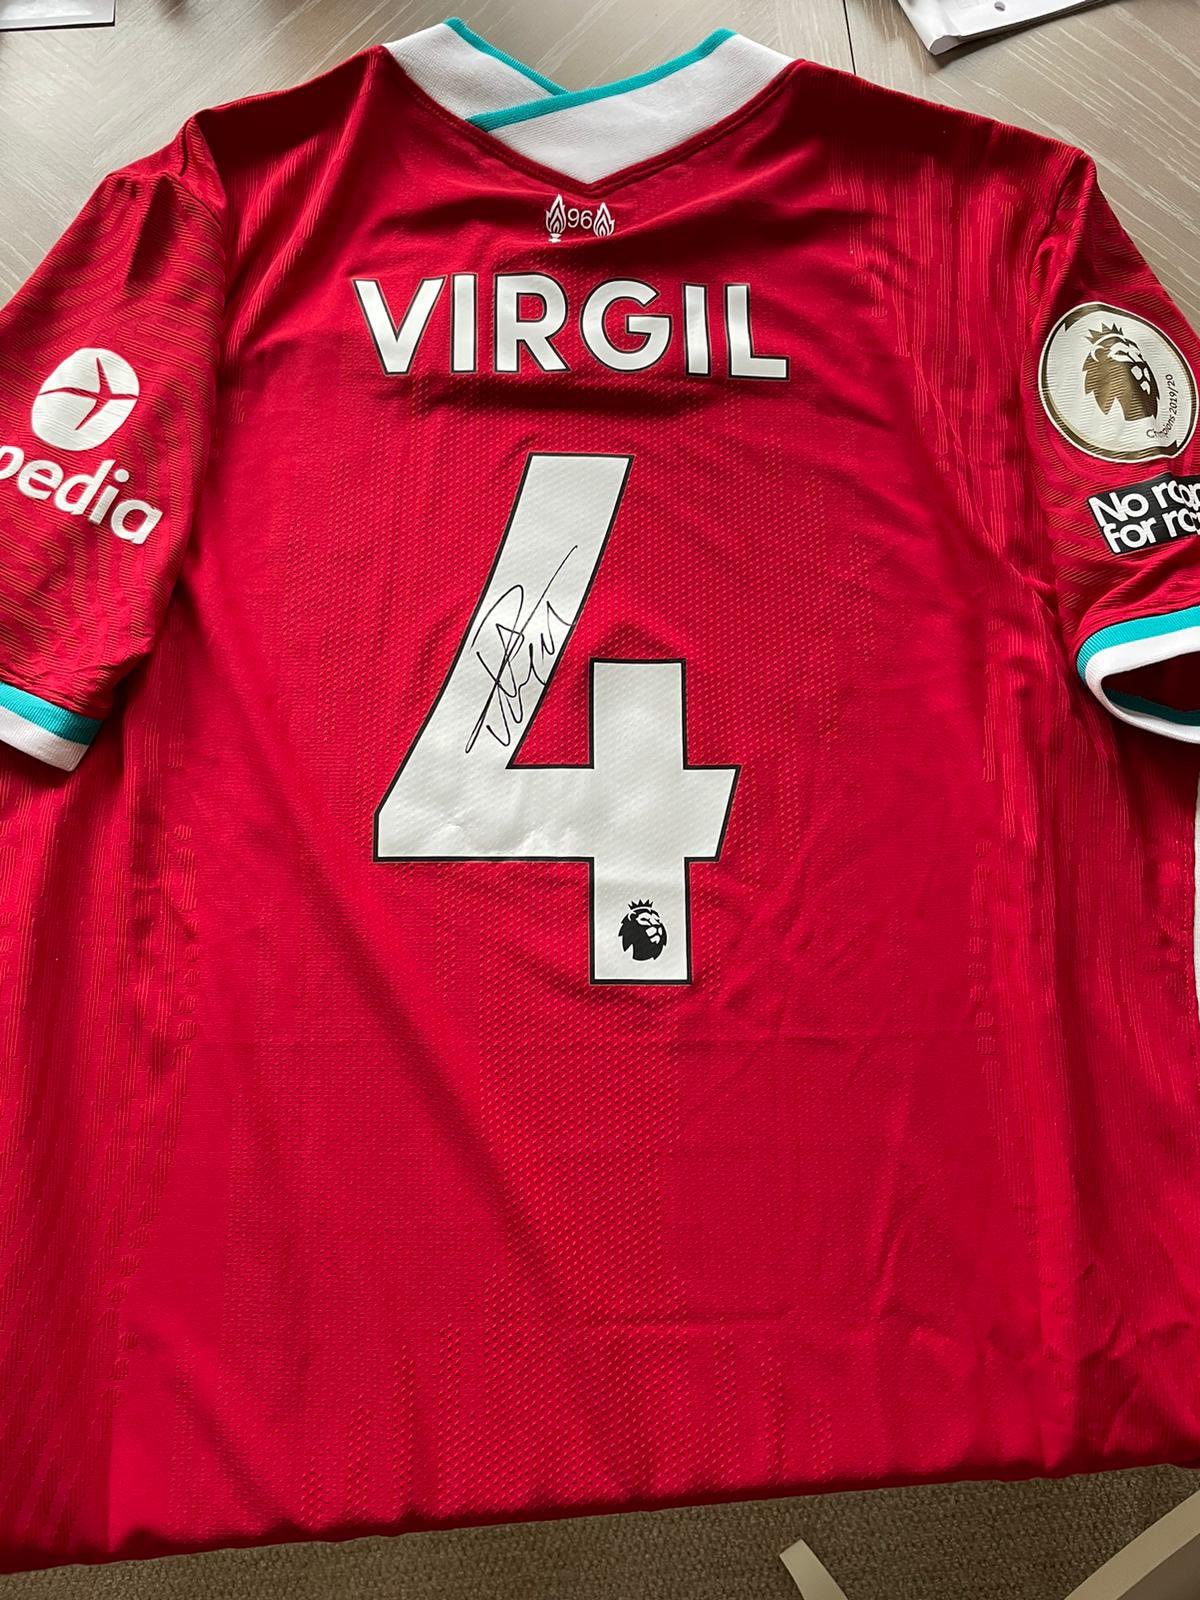 Signed - a signed Virgil shirt is also being auctioned off